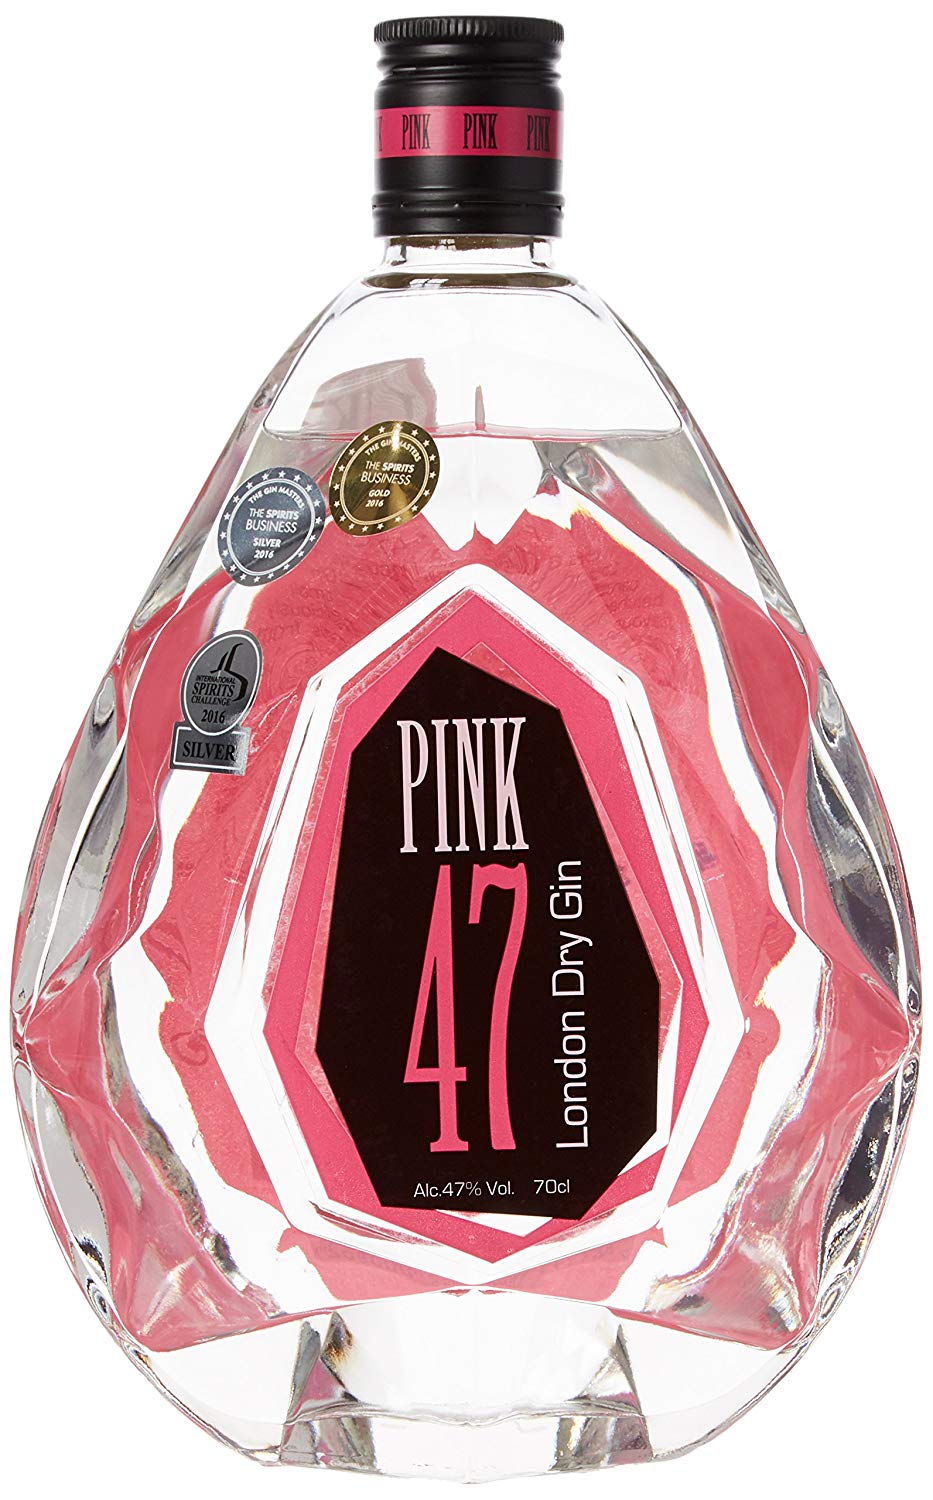 Pink 47 London Dry Gin